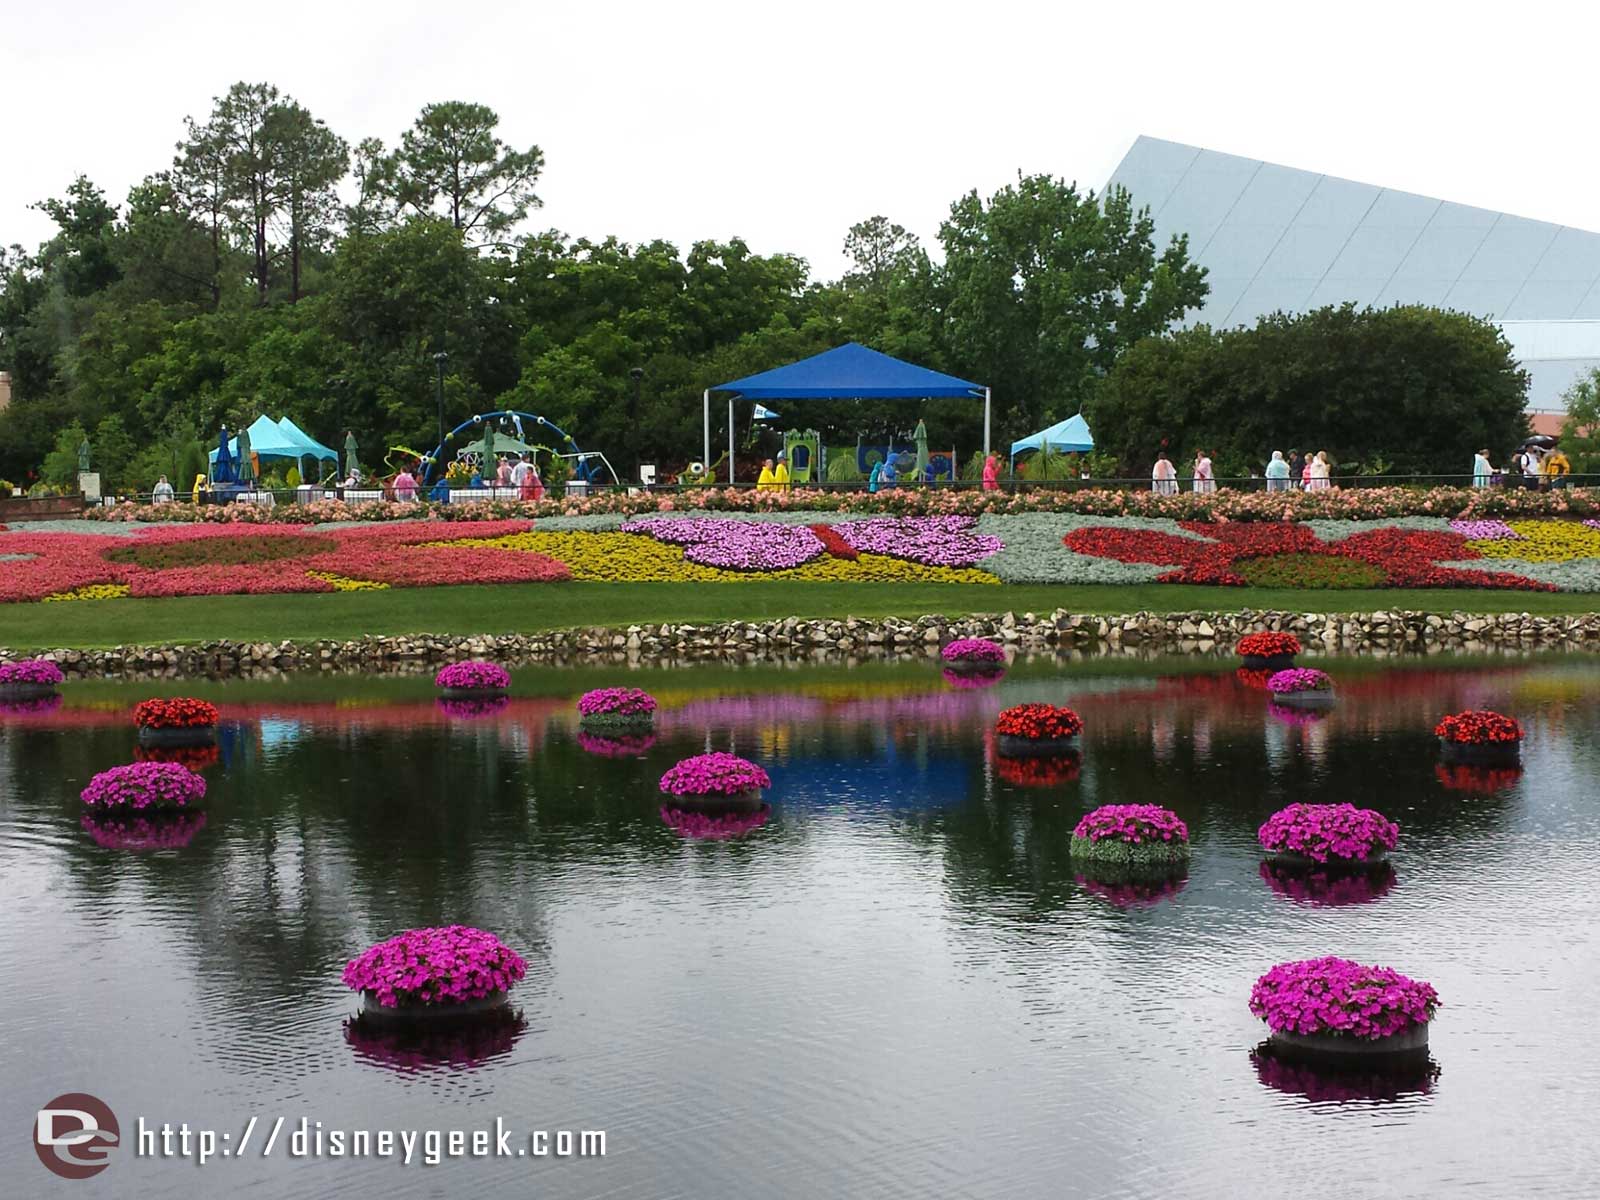 We eventually ventured out. Here are some of the flower beds this year (not many pics since I was jugle an umbrella and cameras) - Epcot International Flower & Garden Festival